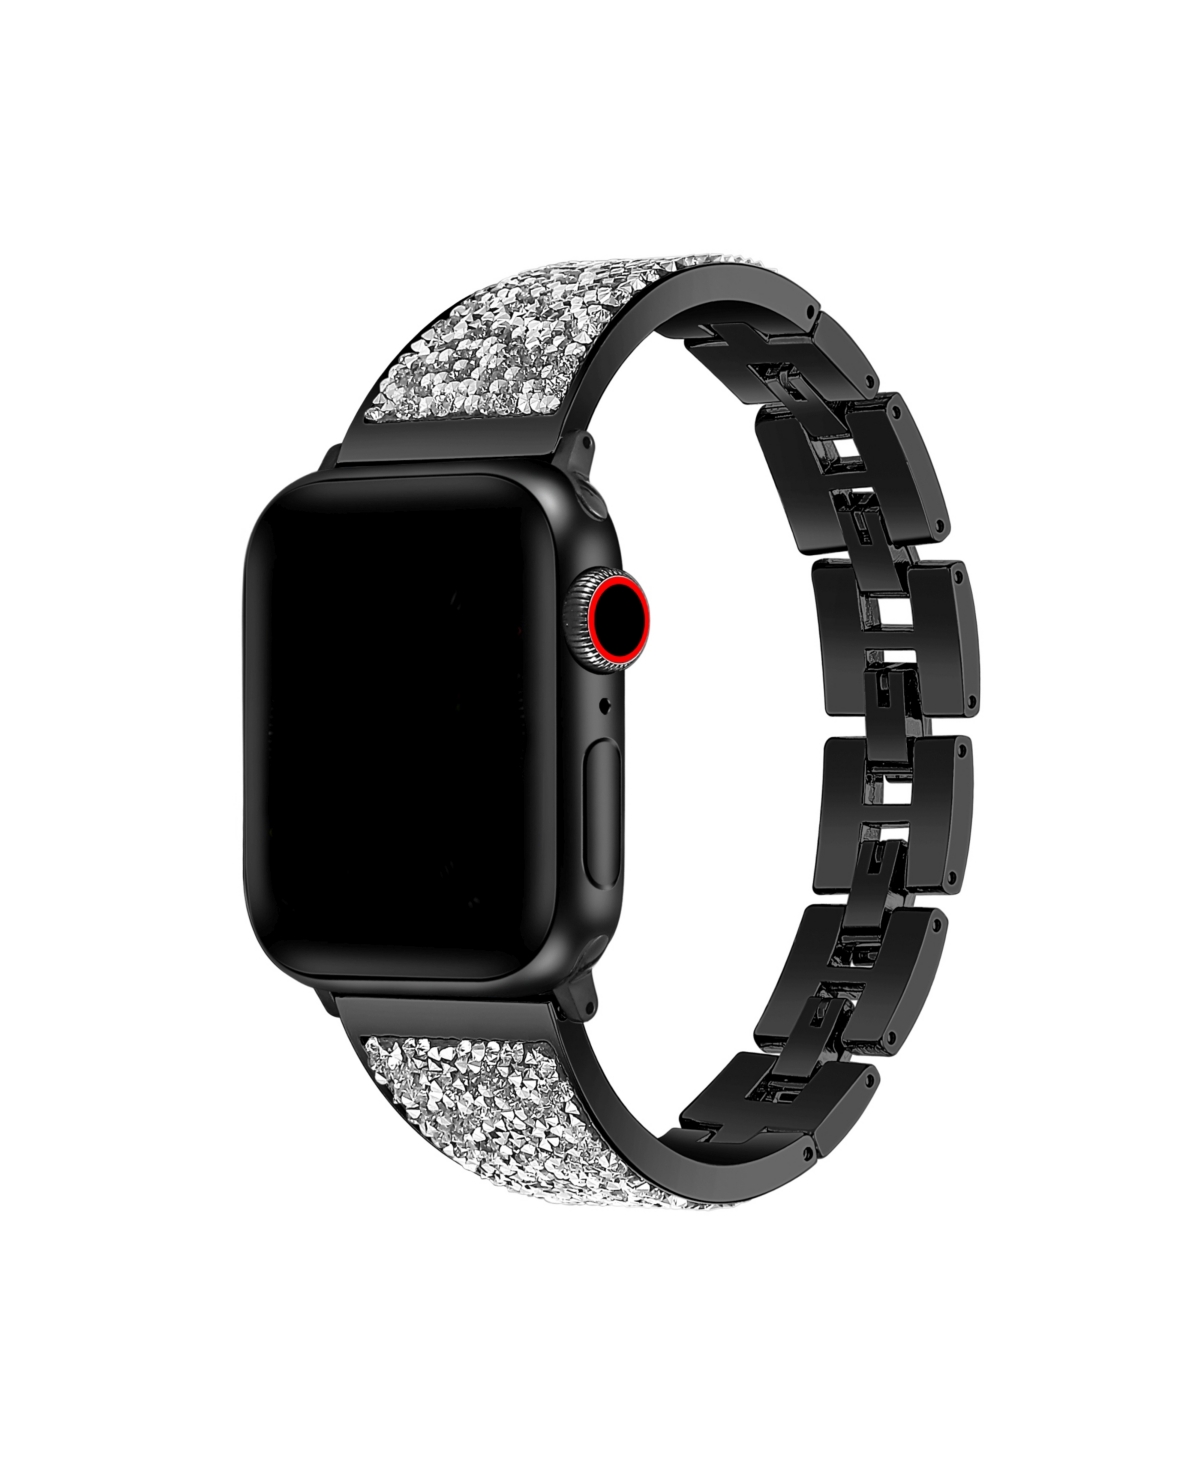 Men's and Women's Black Stainless Steel Band with Stone for Apple Watch 42mm - Multi